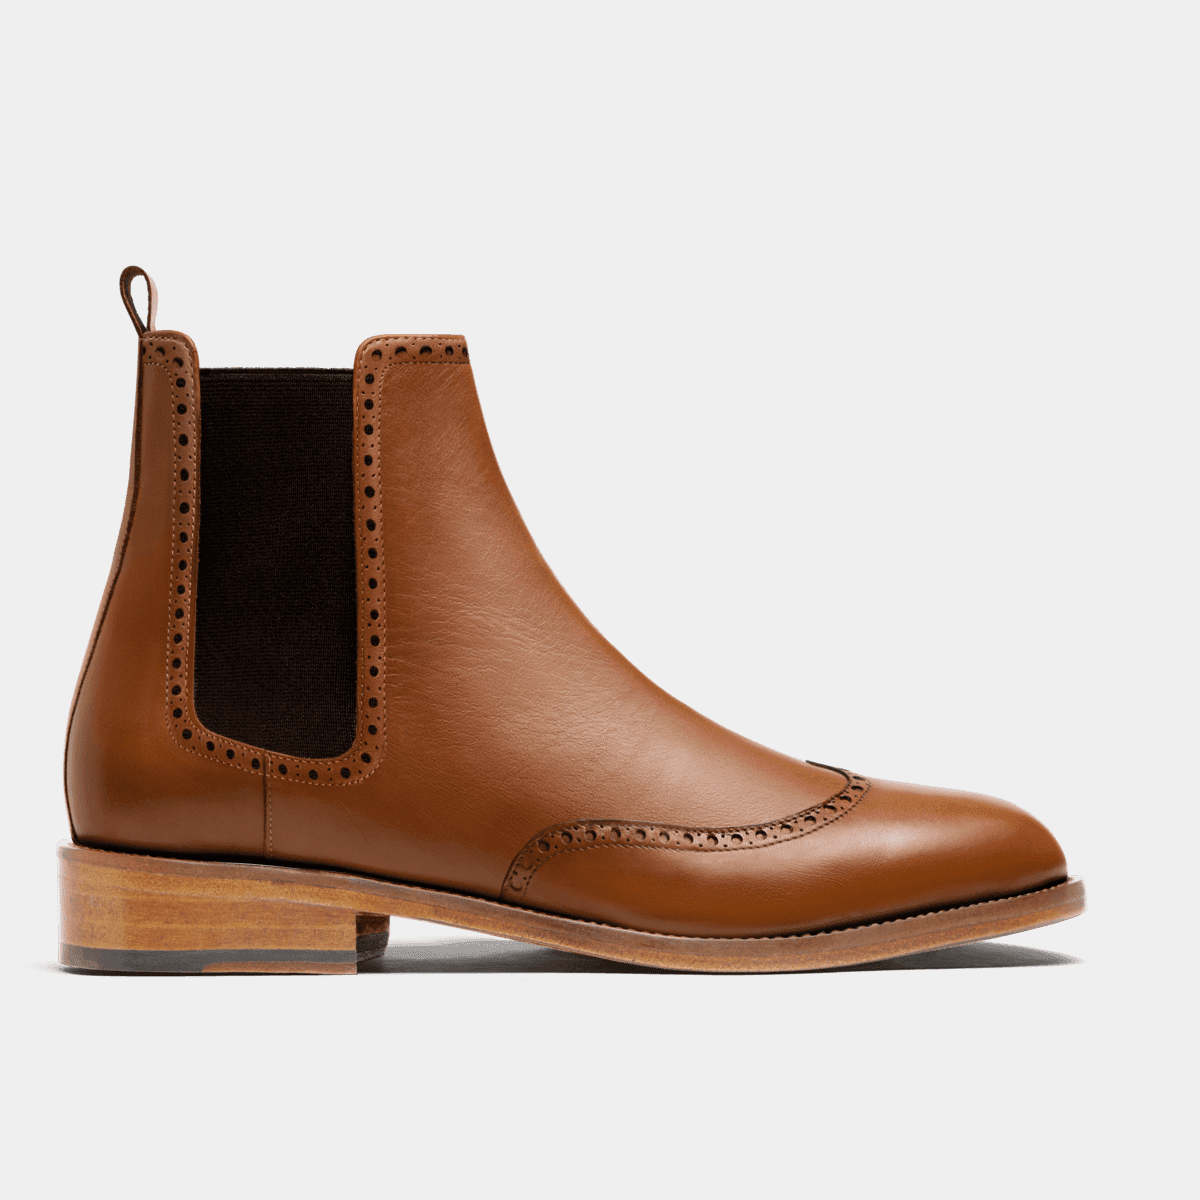 Brogue Women's Chelsea Boots - brown calf leather | Sumissura